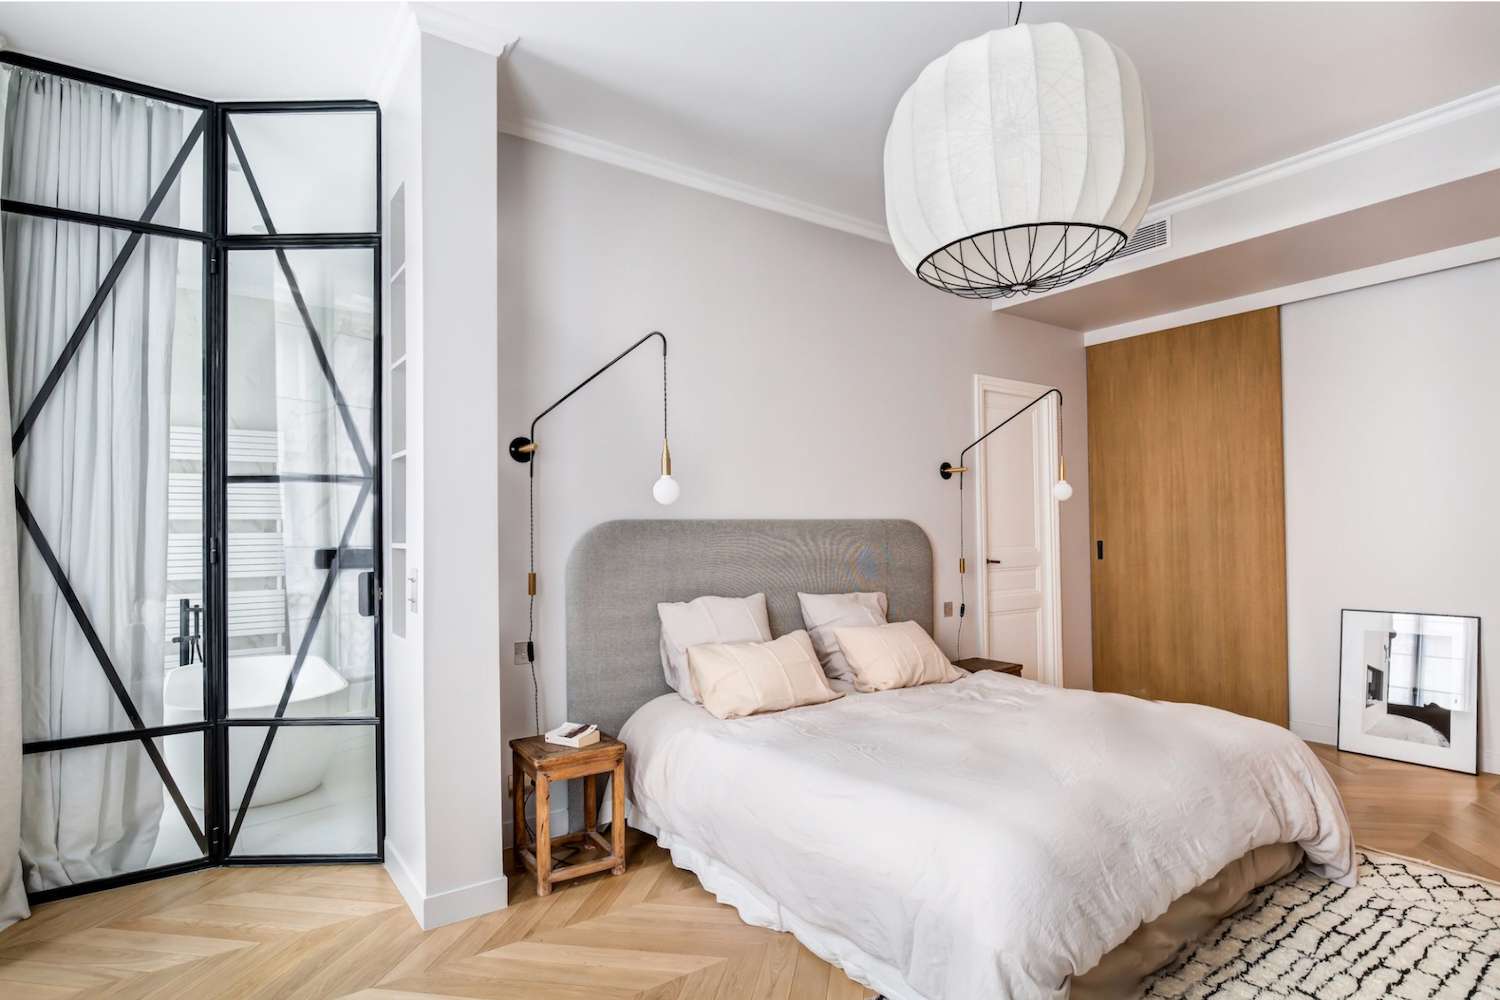 How to Choose the Perfect Scandinavian Bed for Your Bedroom?